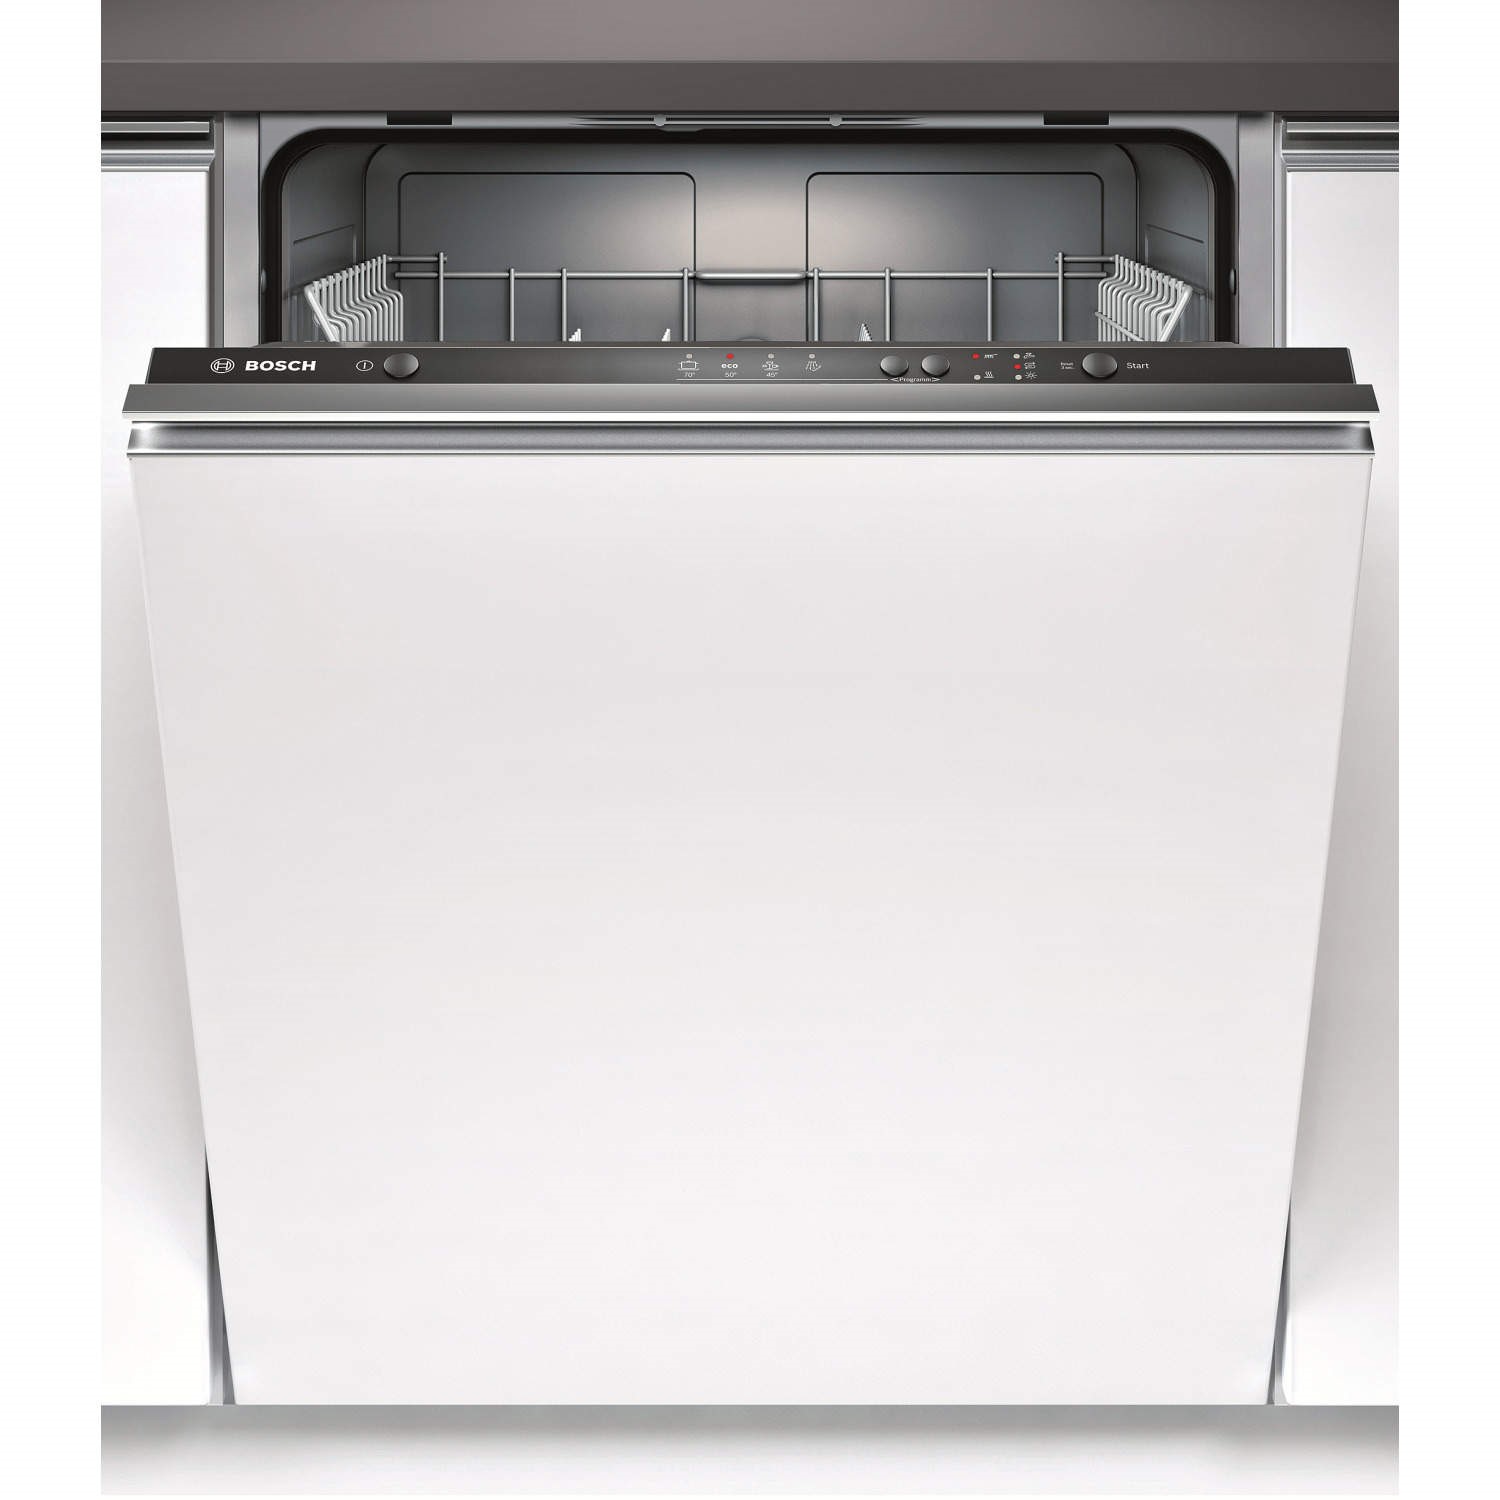 Bosch SMV40T10GB 12 Place Fully Integrated Dishwasher | Appliances Direct